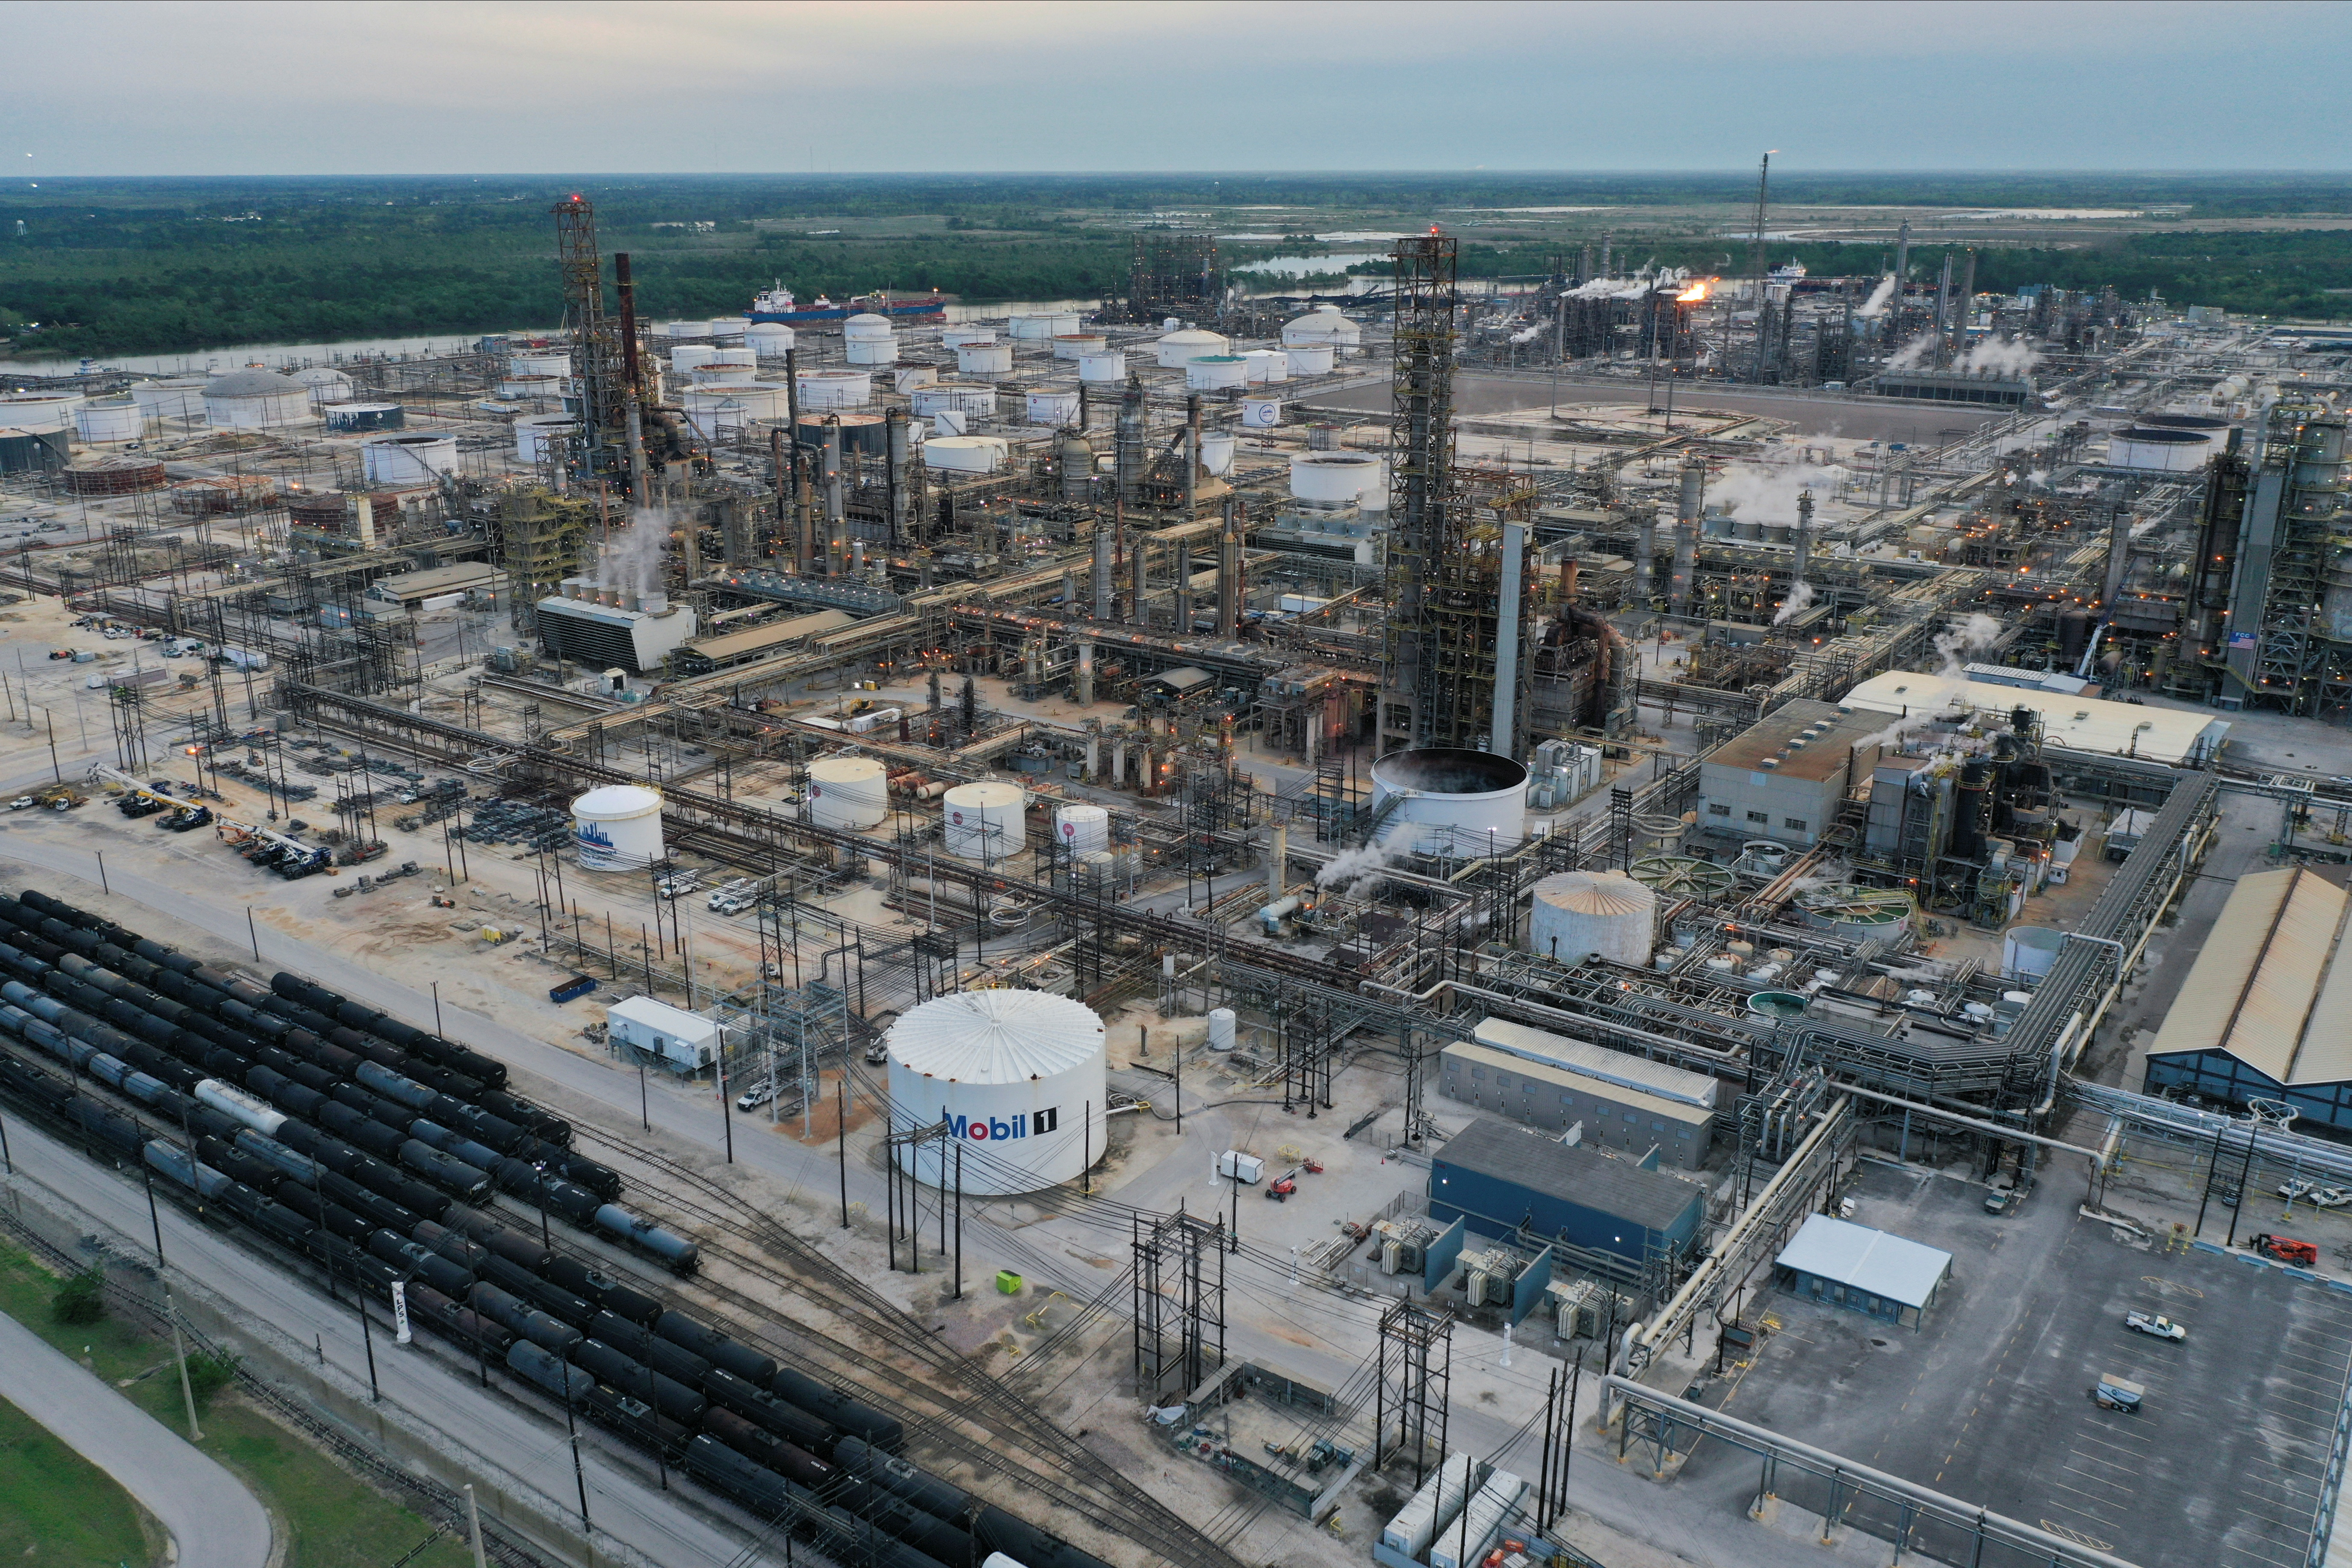 An aerial view of Exxon Mobil’s Beaumont oil refinery, in Beaumont, Texas